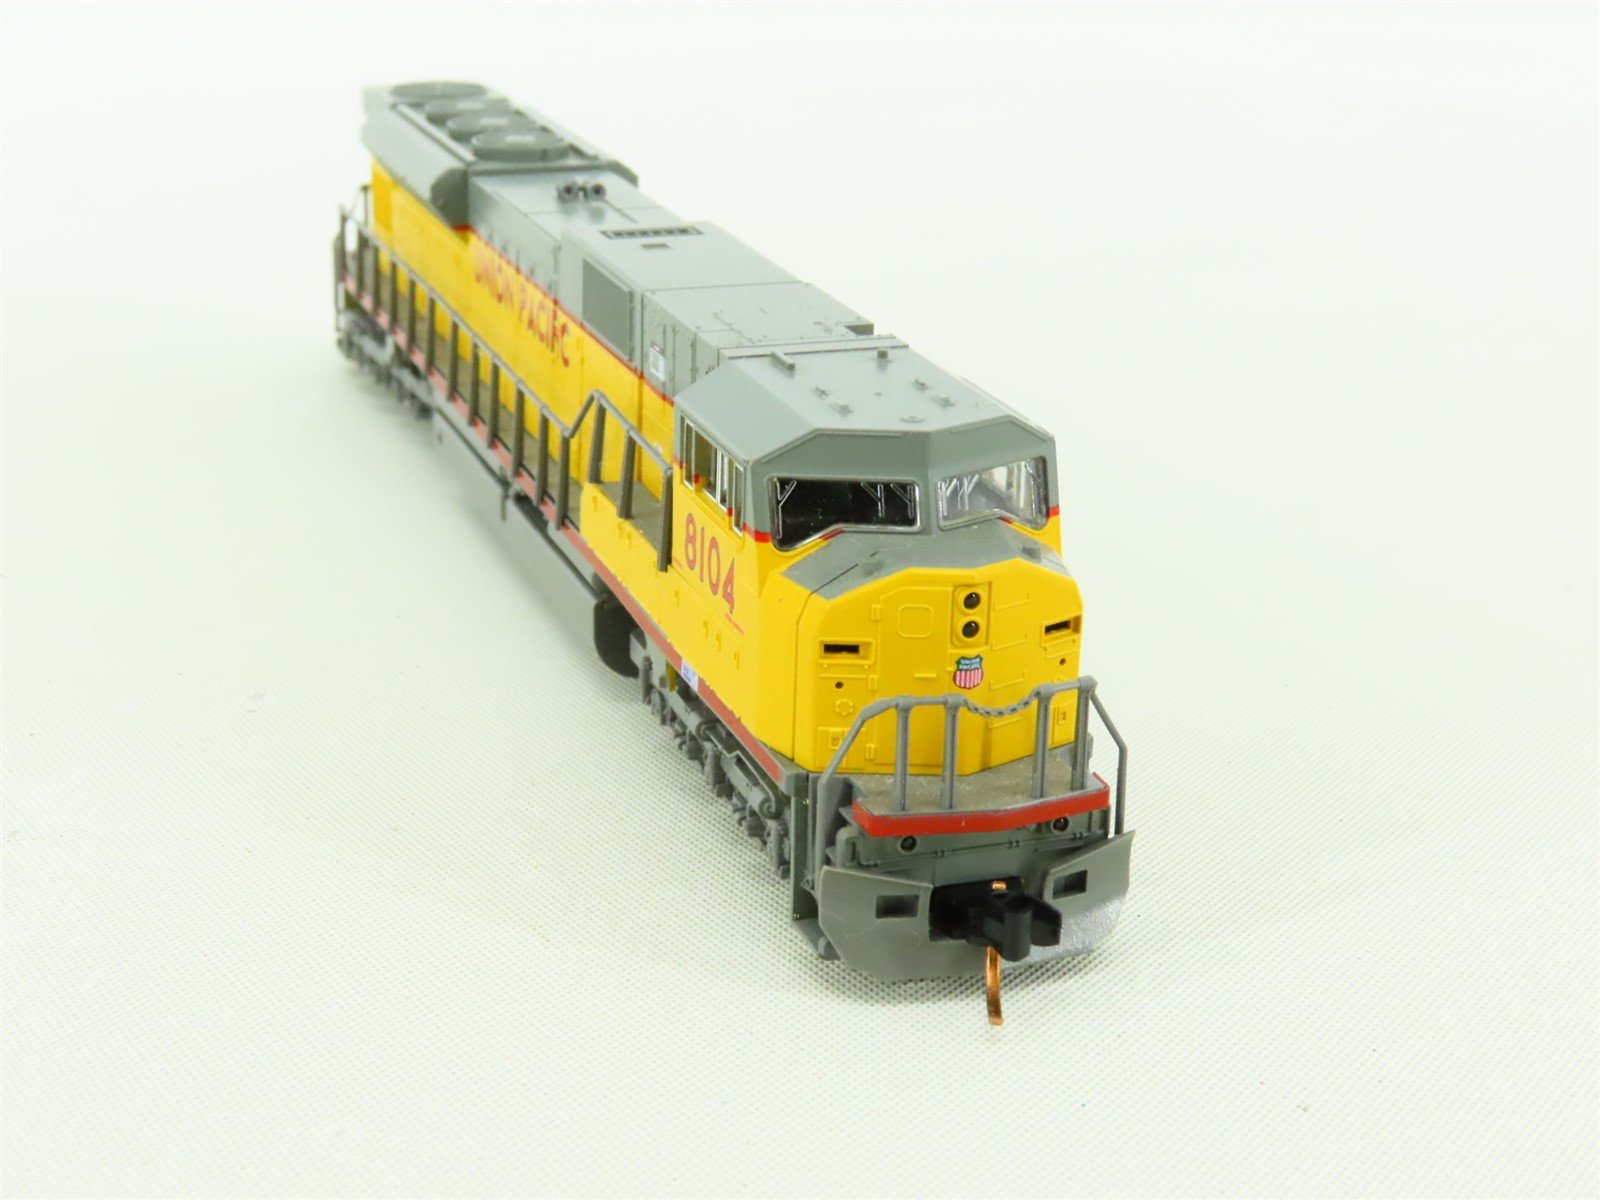 N Scale KATO 176-5604 UP Union Pacific EMD SD90/43MAC Diesel #8104 